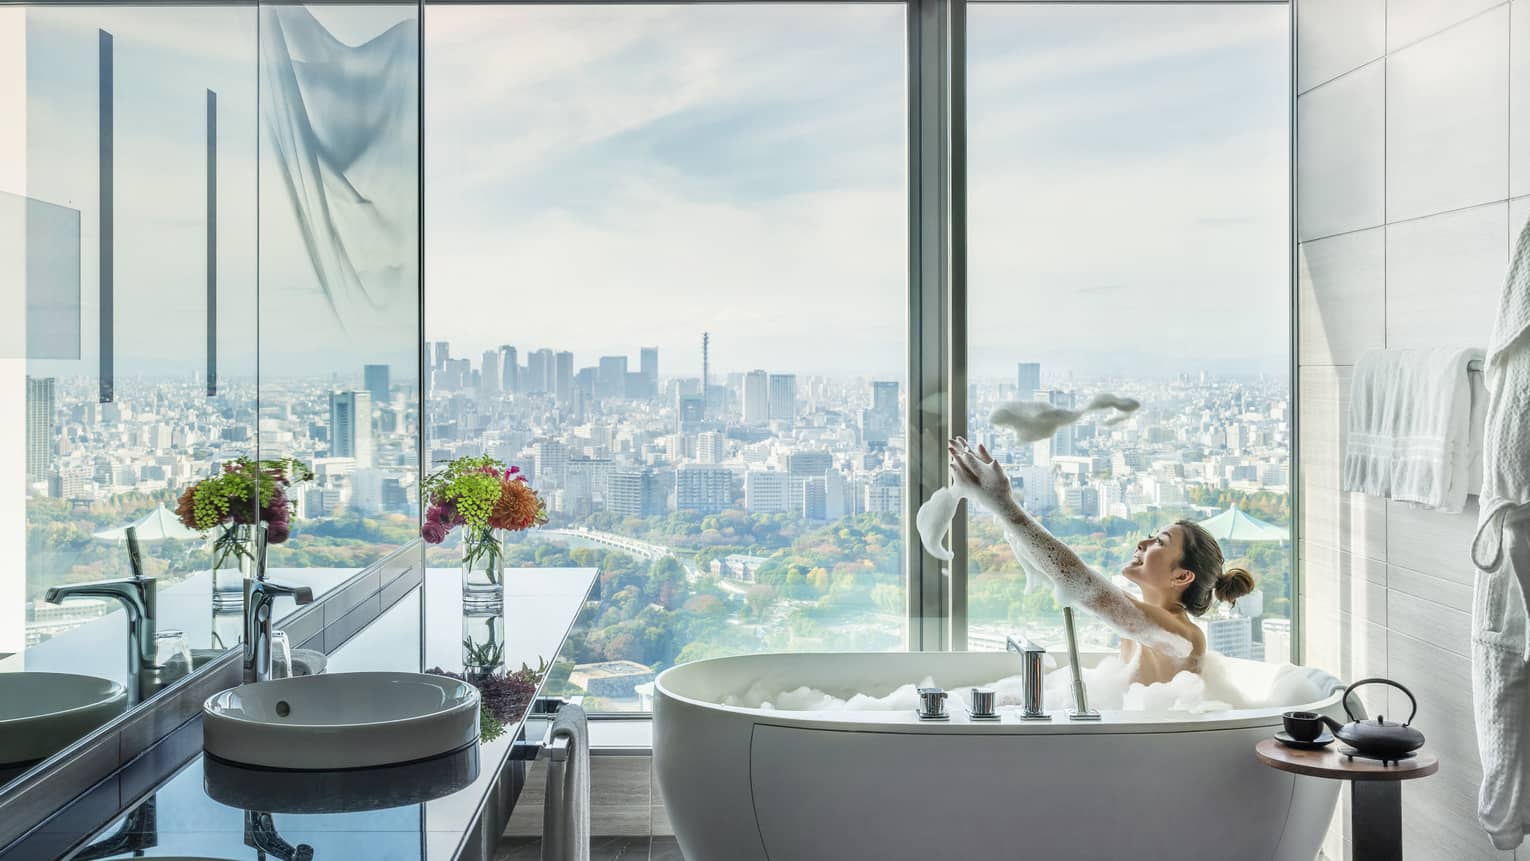 Woman in soaking tub in guest bathroom, floor-to-ceiling windows with city views